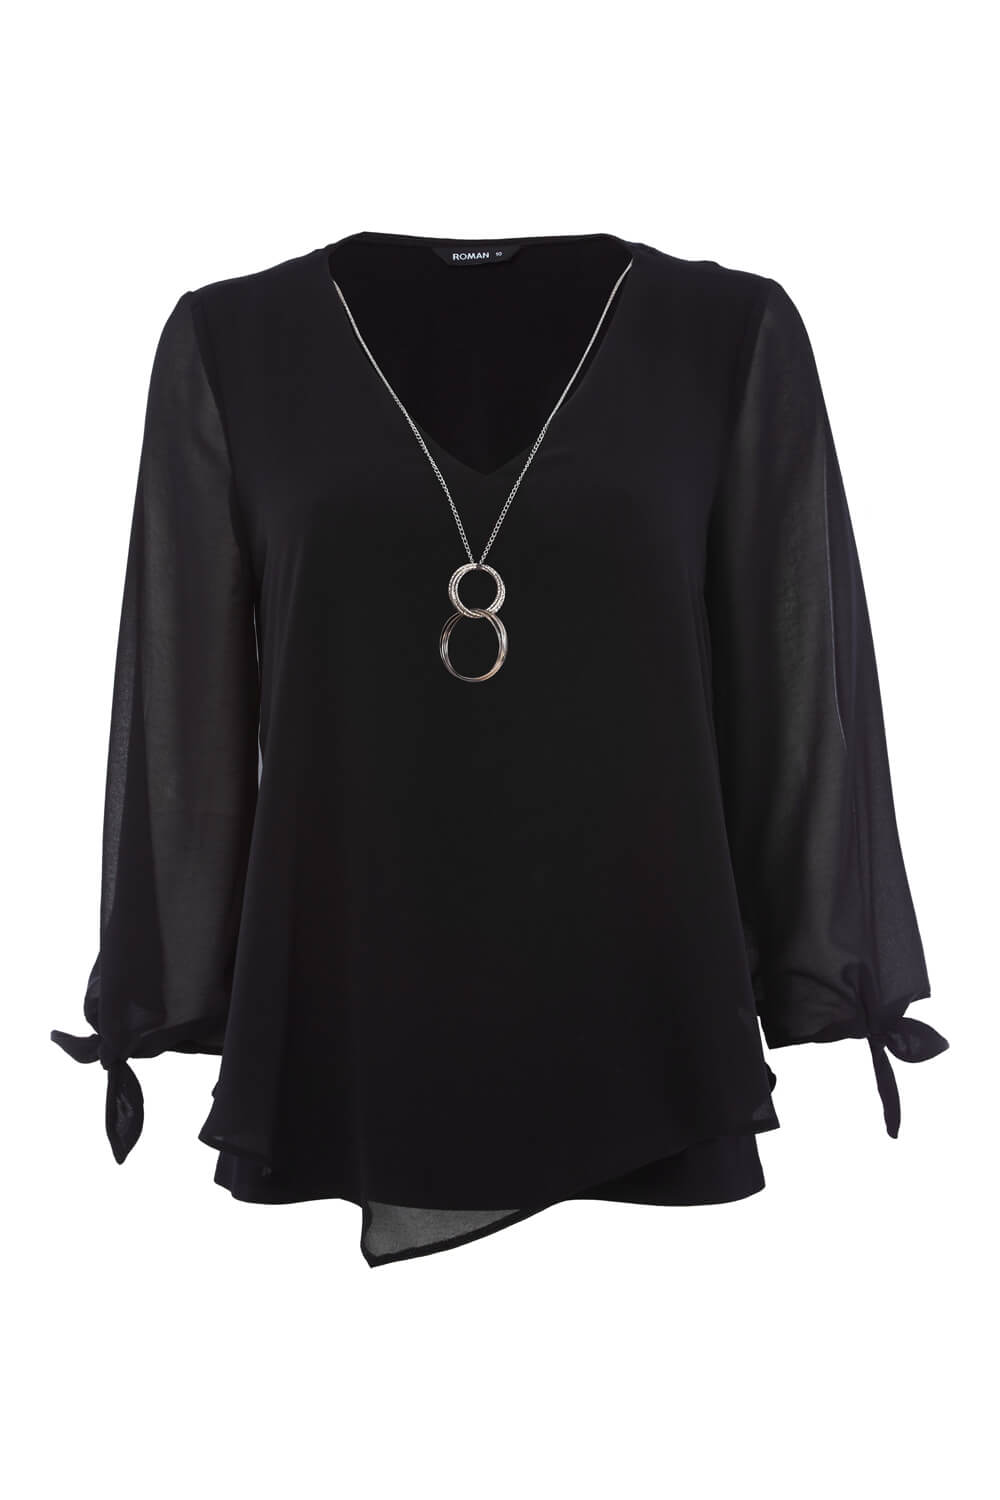 Black Necklace Trim Jersey 3/4 Sleeve Chiffon Top, Image 5 of 5